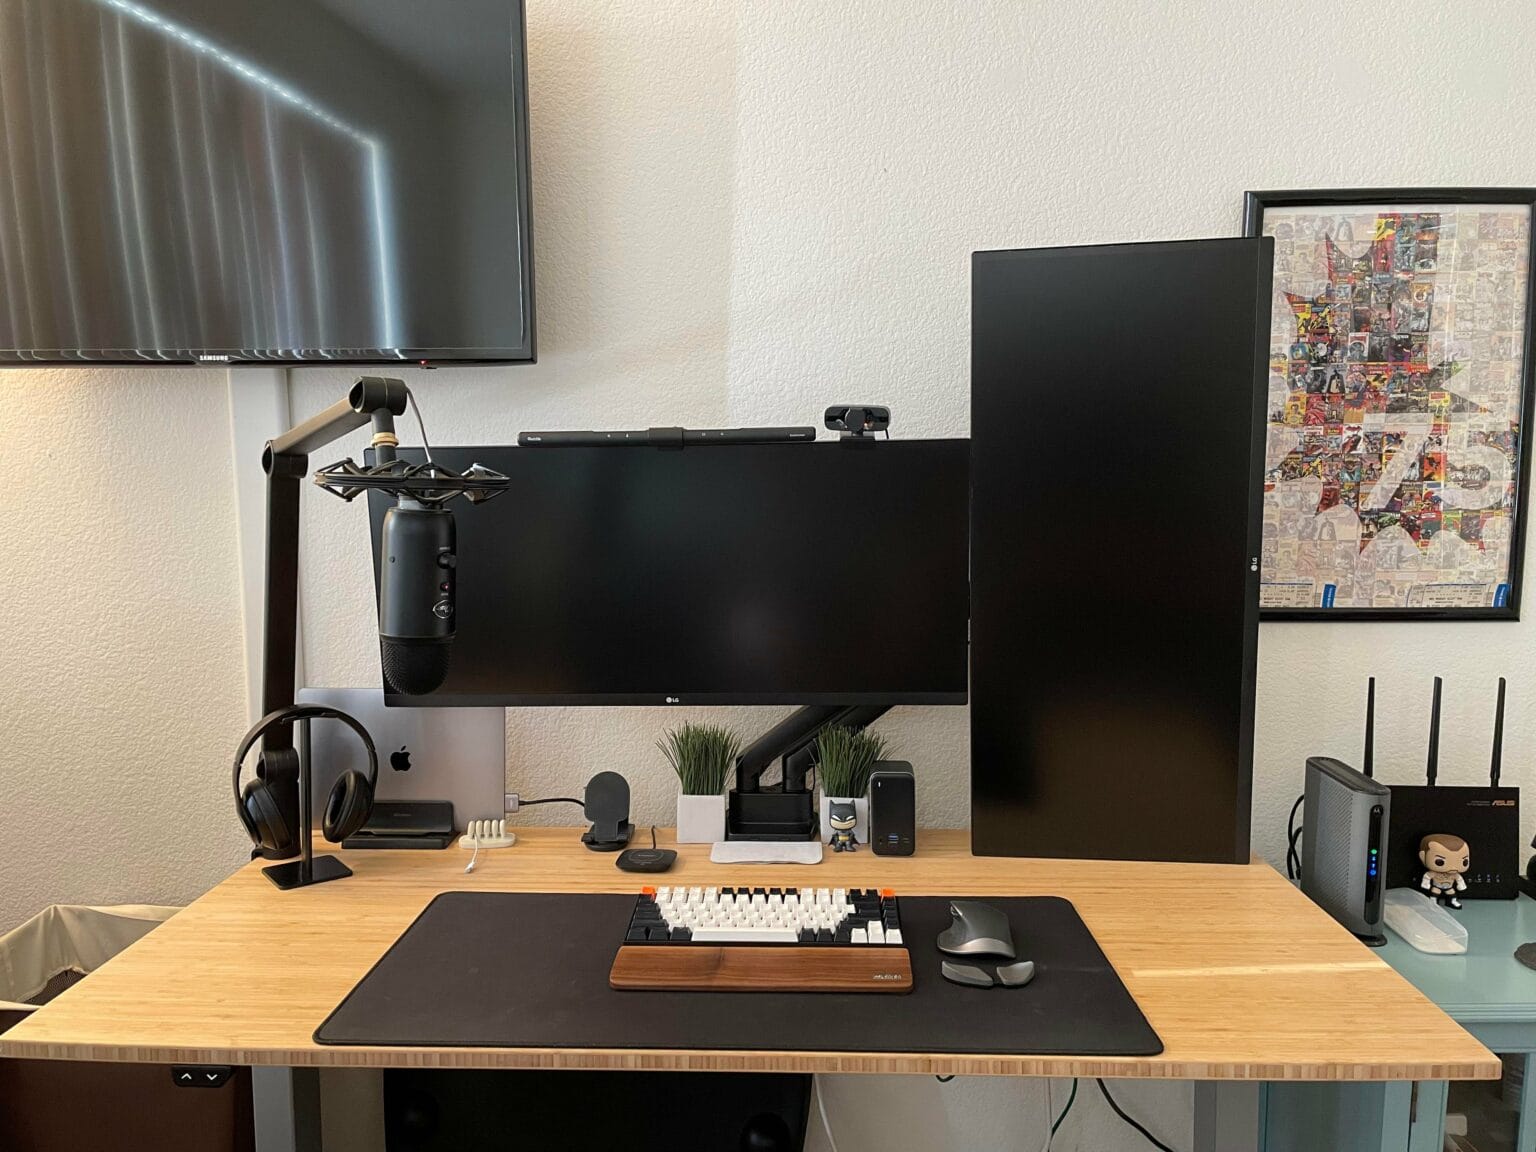 You get a tall and narrow display when your portrait-mode (vertical) monitor is an ultra-wide.